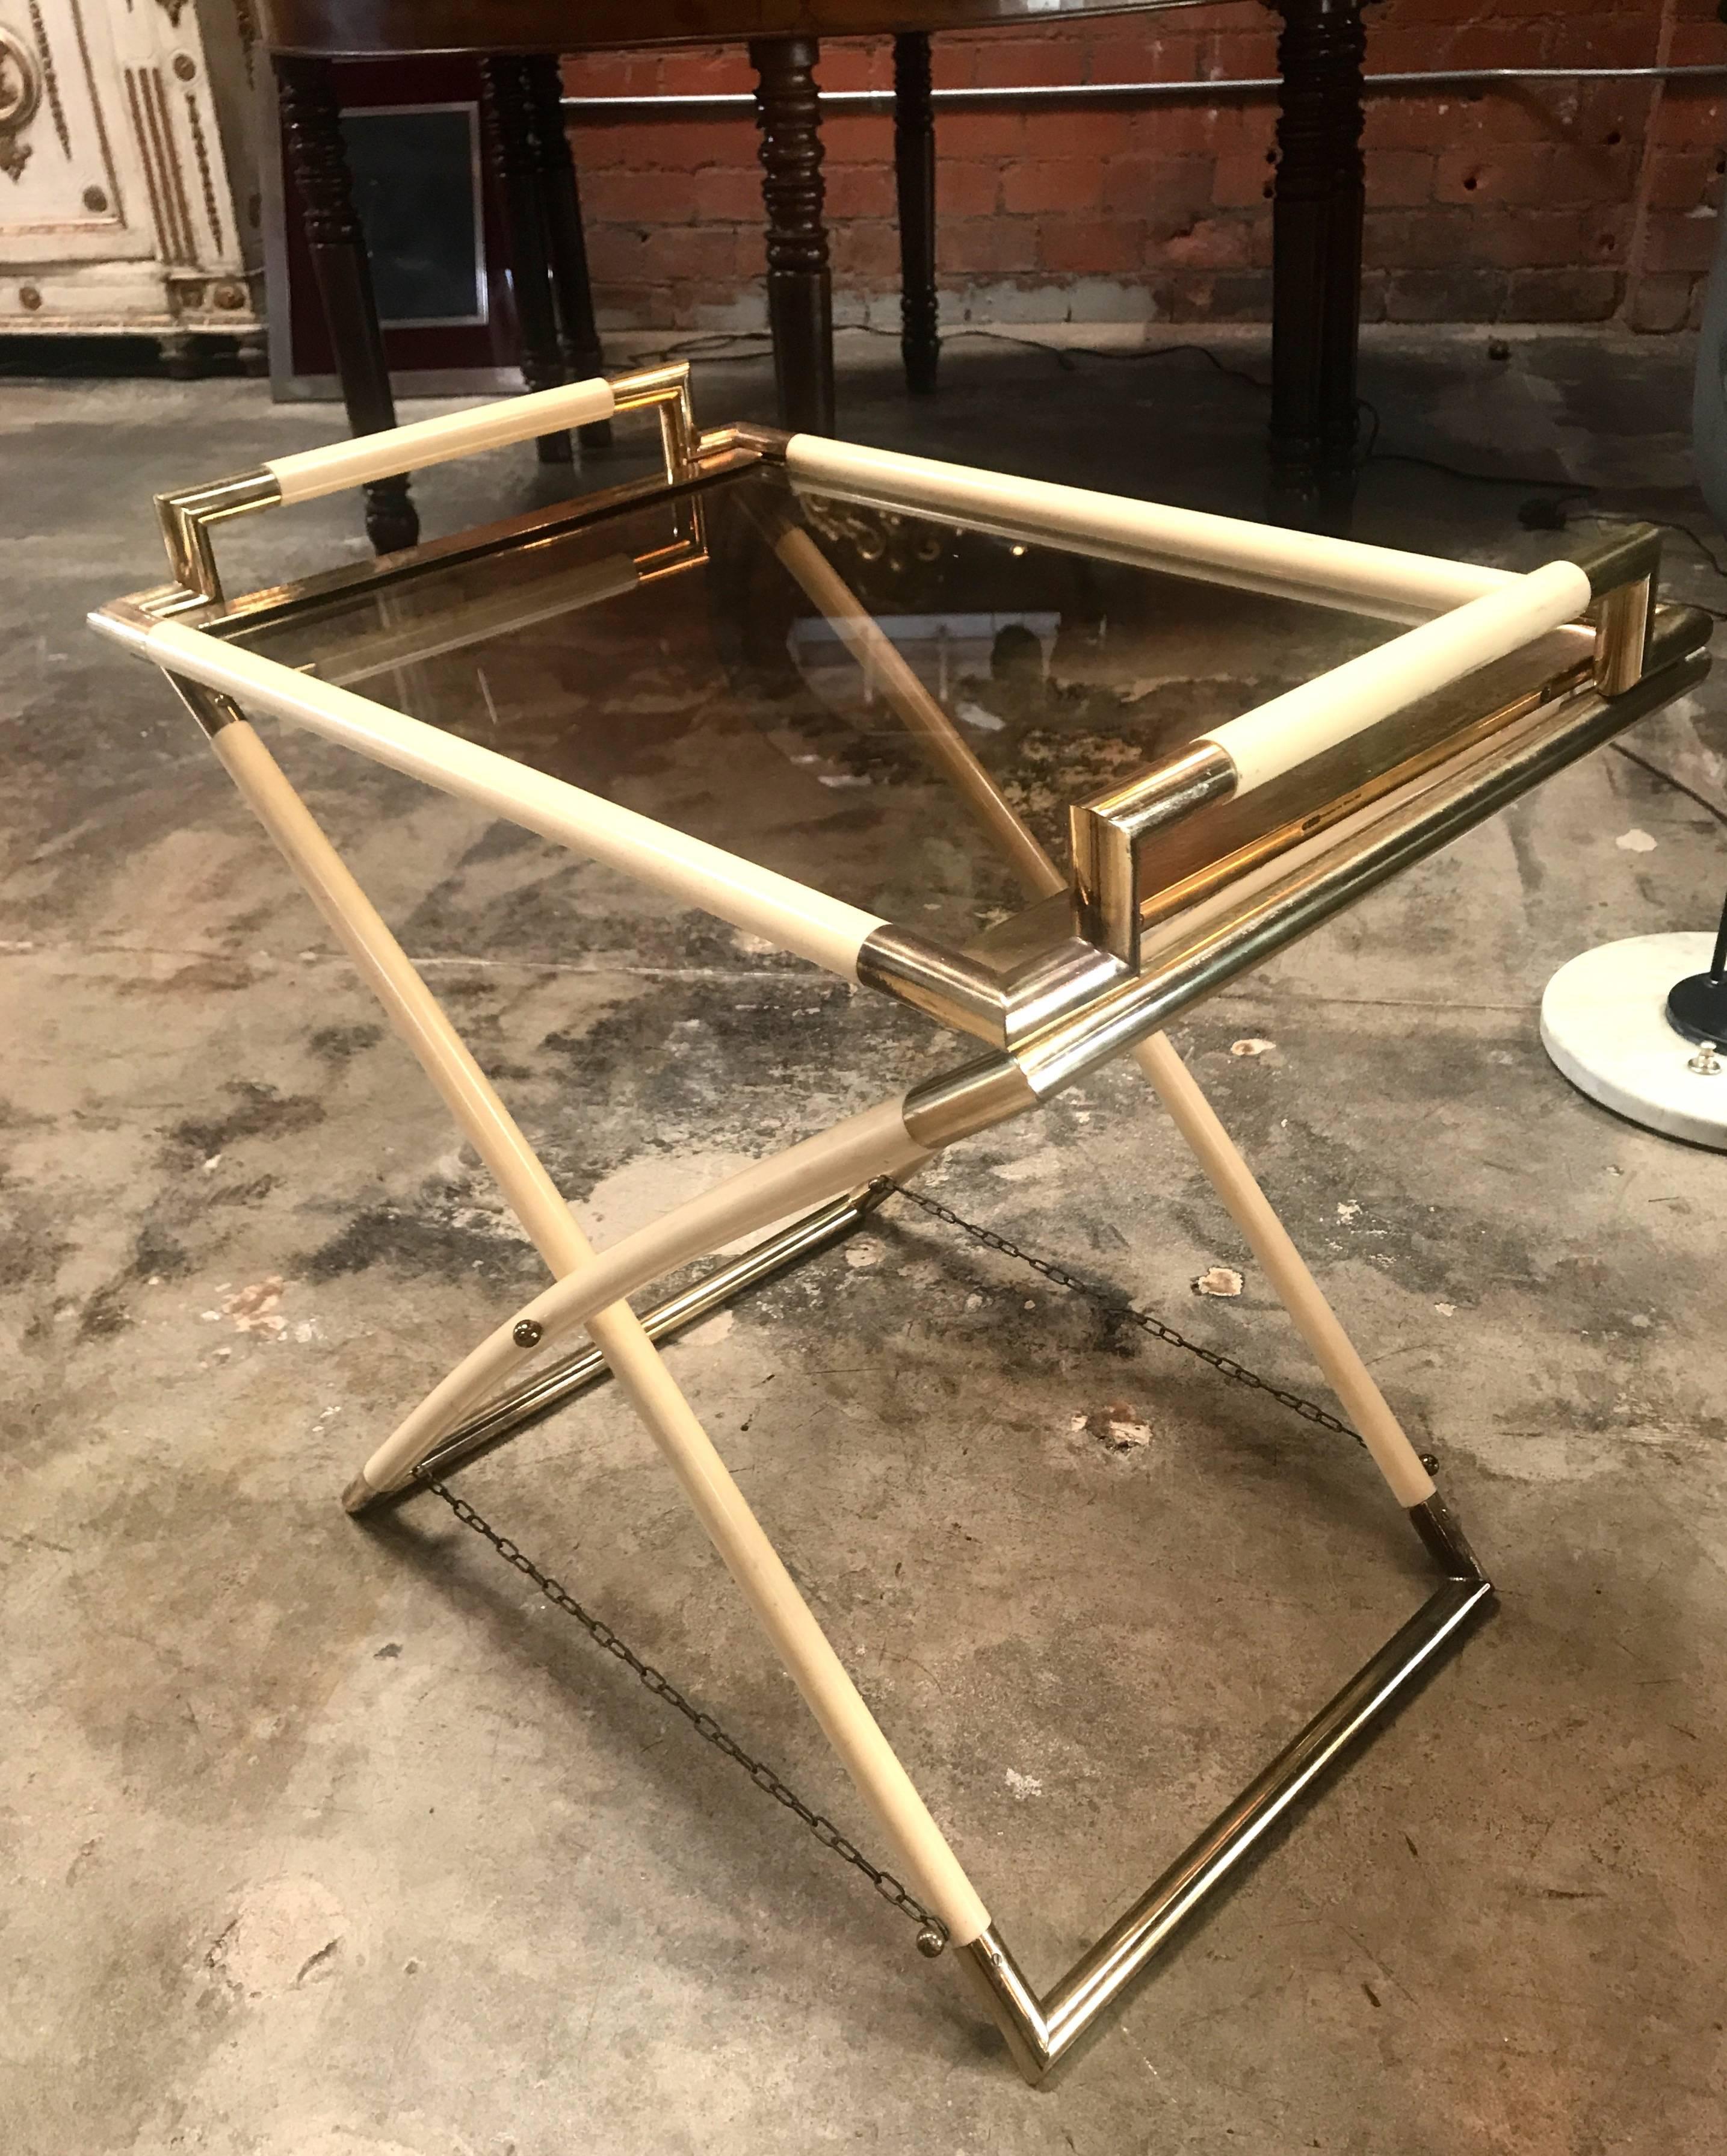 Vintage brass and glass cocktail table 
(with the top that becomes a tray).